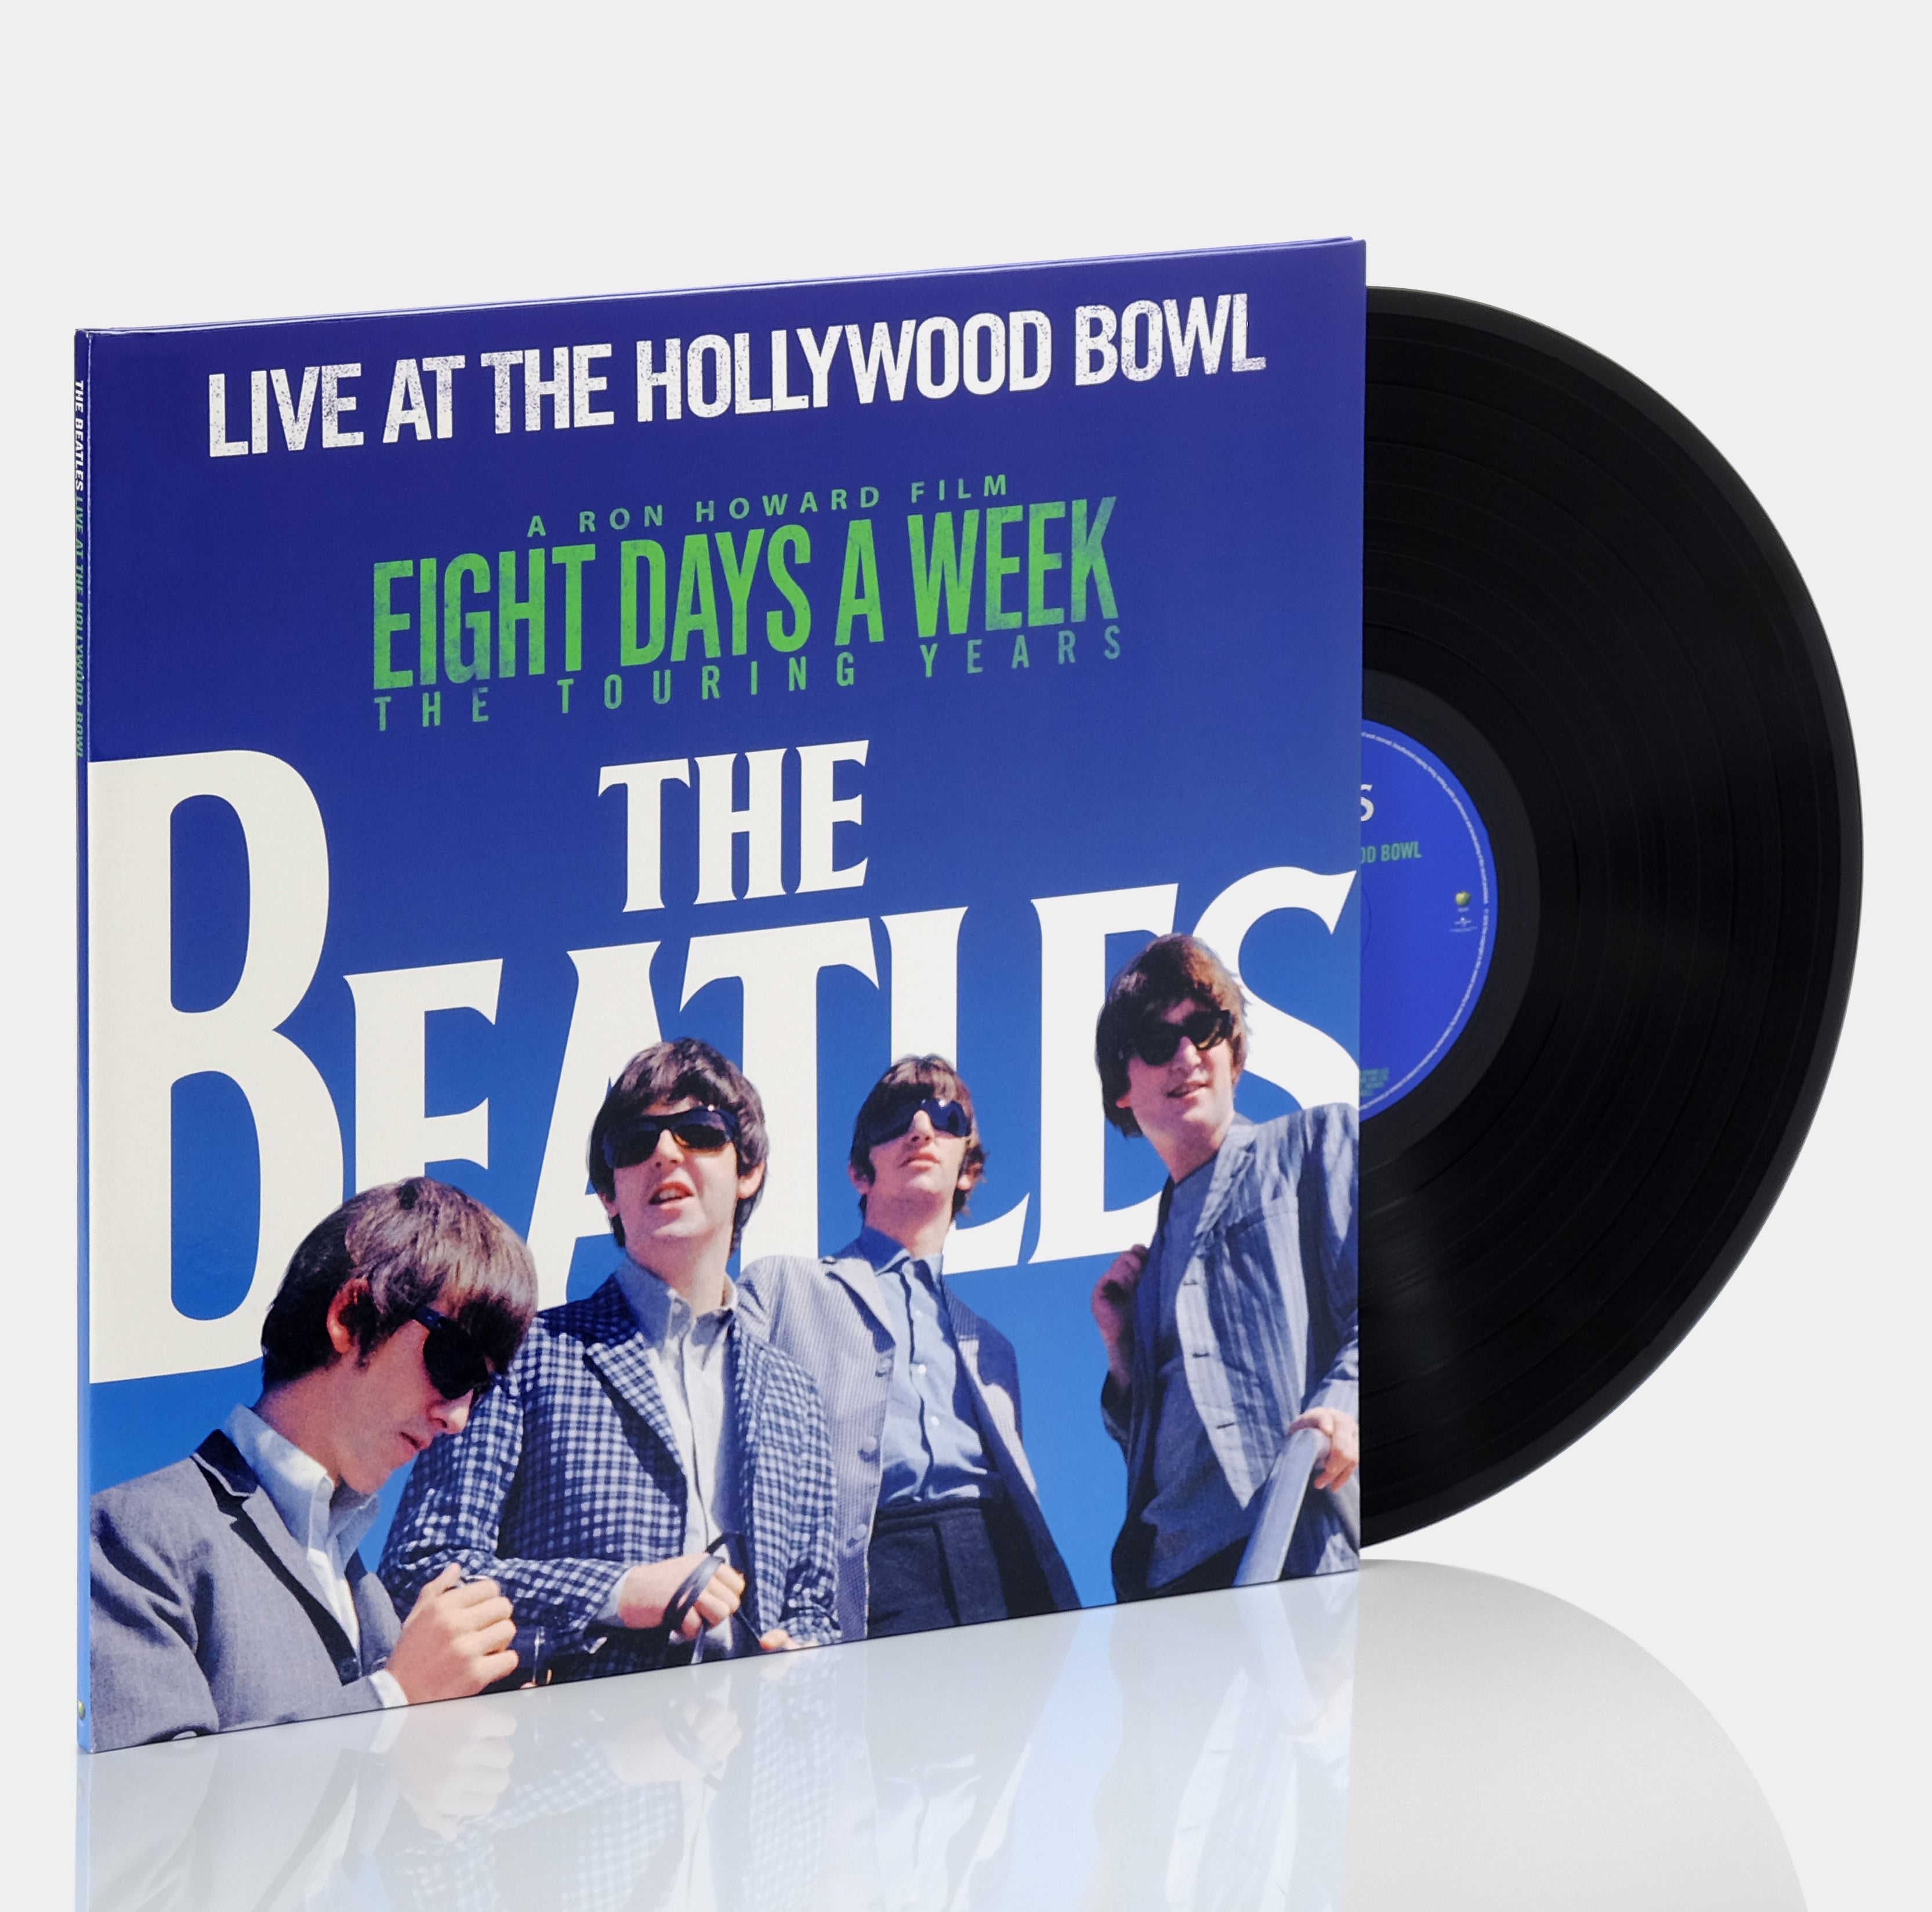 The Beatles - Eight Days a Week (The Touring Years) LP Vinyl Record